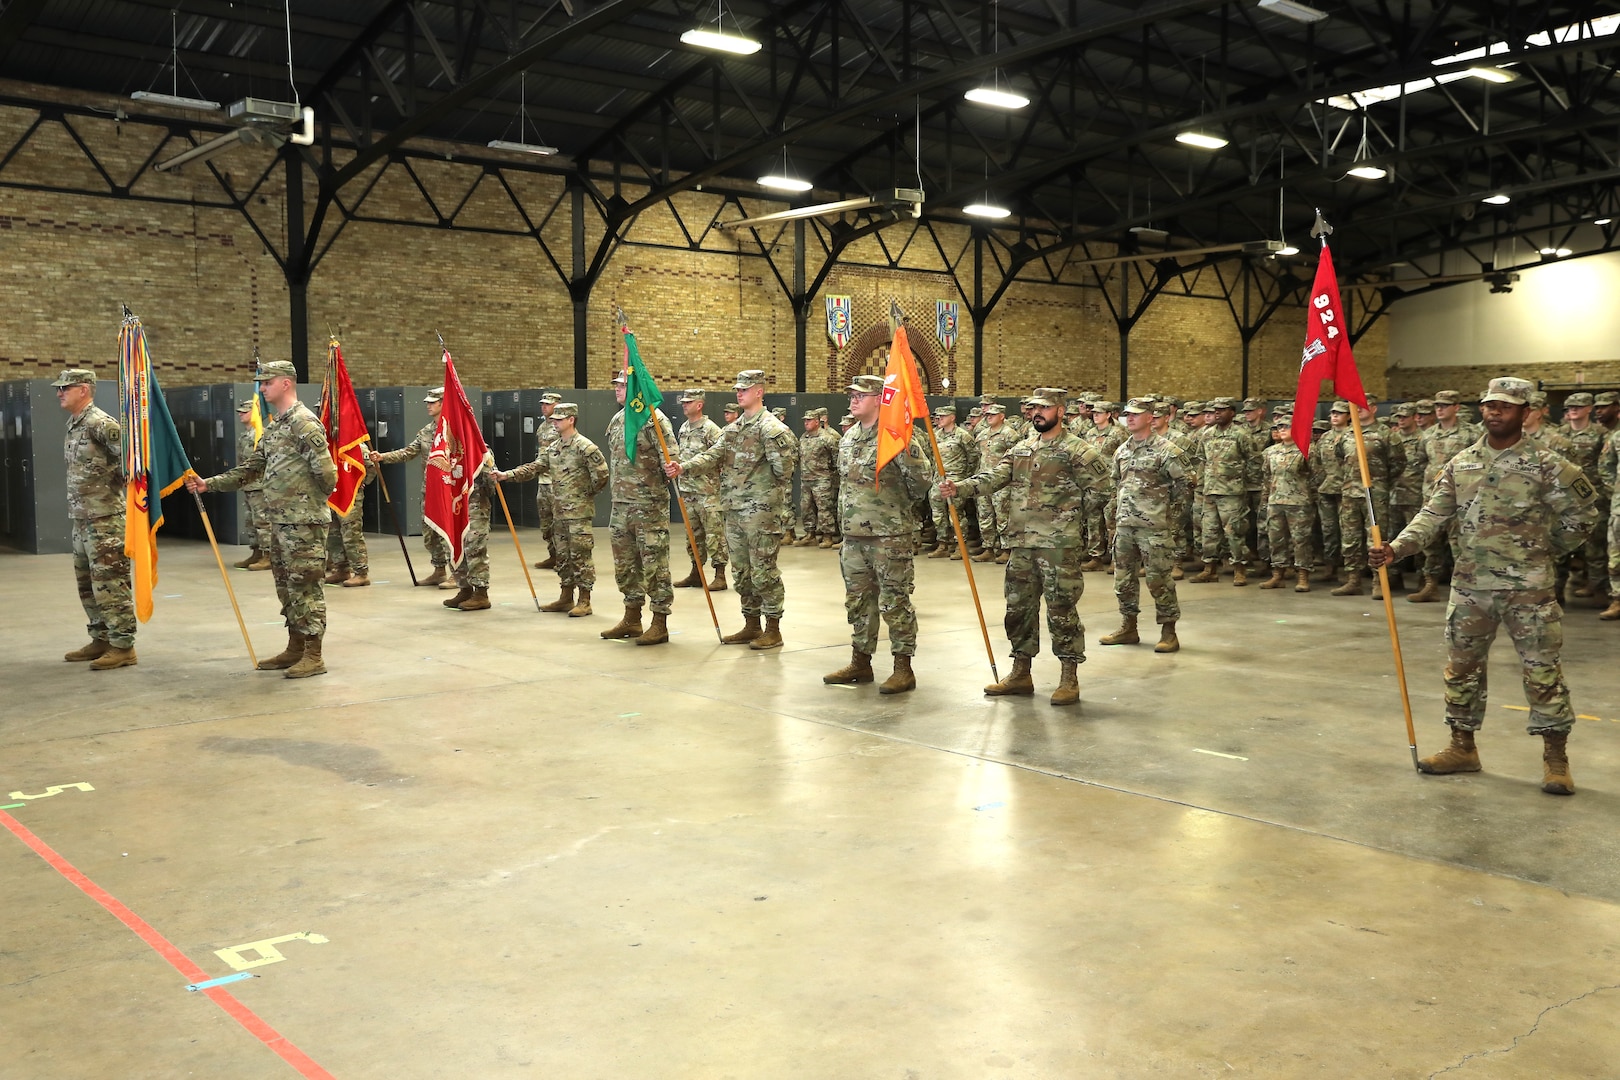 Soldiers of the 157th Maneuver Enhancement Brigade stand in formation during a formal change of command ceremony Nov. 4 at the Richards Street Armory in Milwaukee. During the ceremony, Col. Paul Gapinski assumed command of the “Iron Brigade” from Col. Eric Leckel. Wisconsin National Guard photo by Sgt. 1st Class Katie Theusch